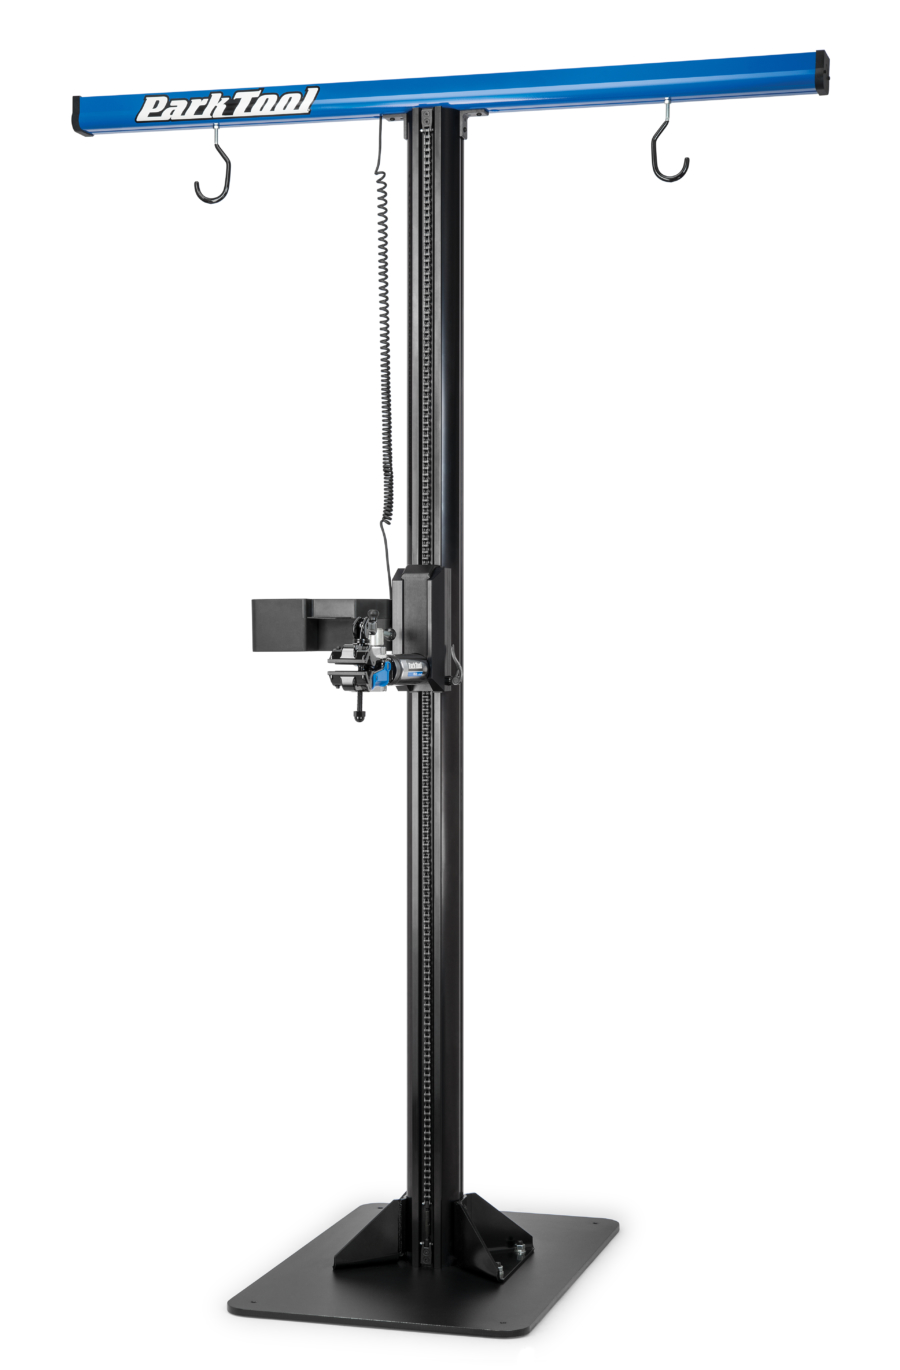 The Park Tool PRS-33 Power Lift Shop Stand shown with optional 135-33 base, enlarged